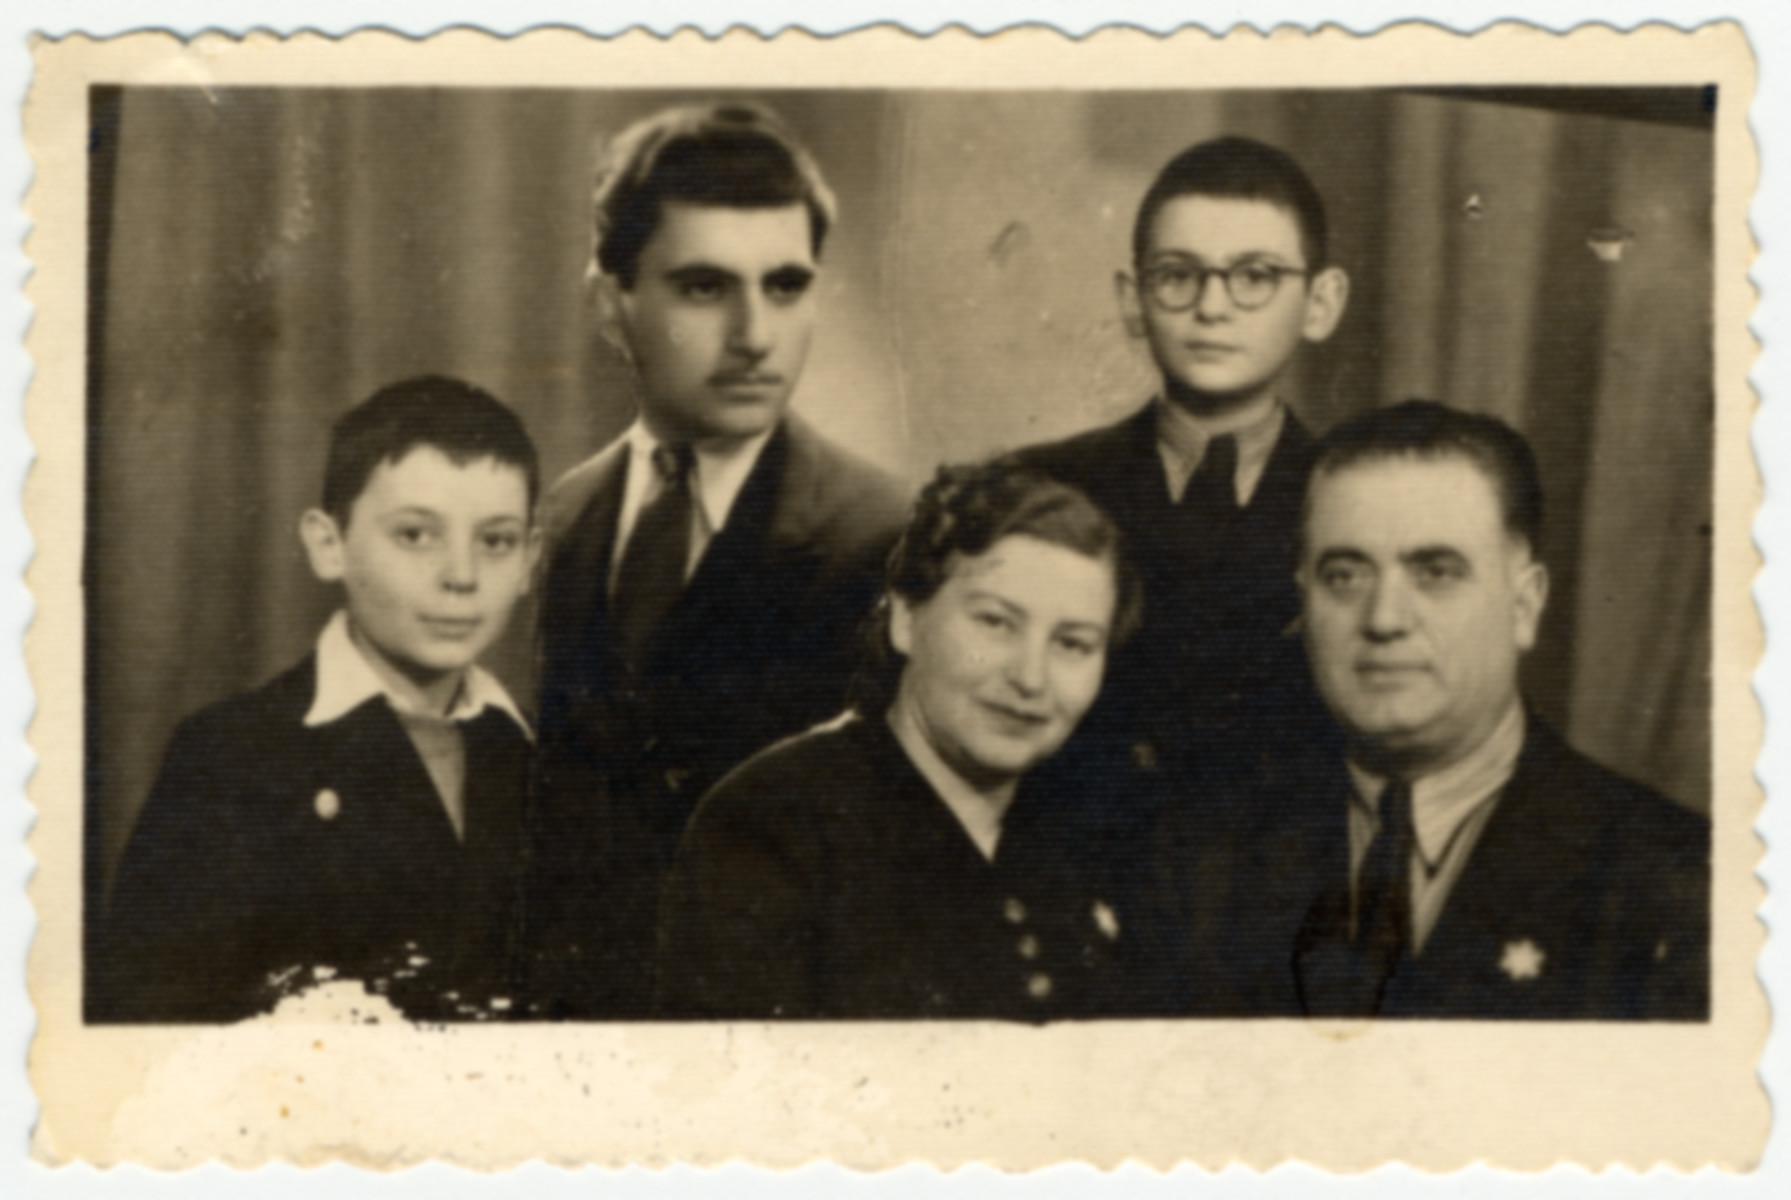 Composite photograph of the Farhis, a Bulgarian Jewish family wearing Stars of David.

The oldest son David was not present for the photograph so his picture was added later.  Also pictured from left to right are Moise, Karolina, Albert and Nissim Farhi.